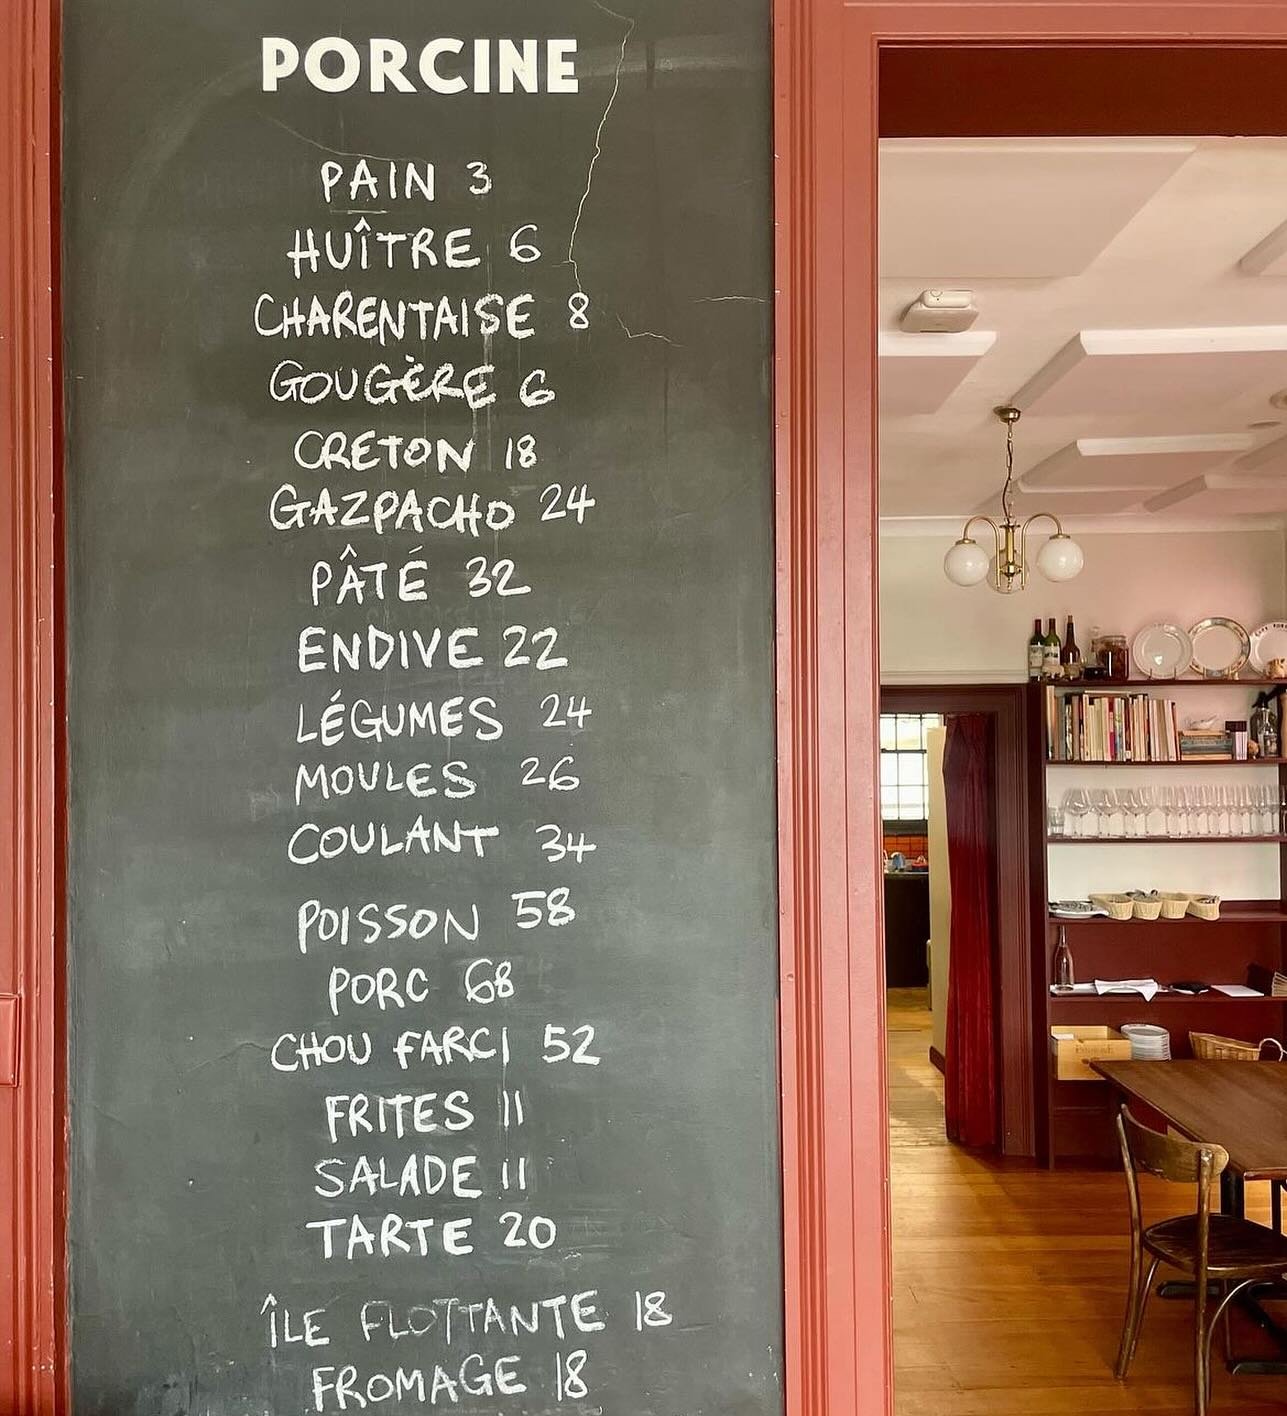 Porcine will be open for dinner service next Wednesday evening and will be closed on Anzac Day. For reservations hit the website or feel free to walk on in. 

#enterthroughthegiftshop